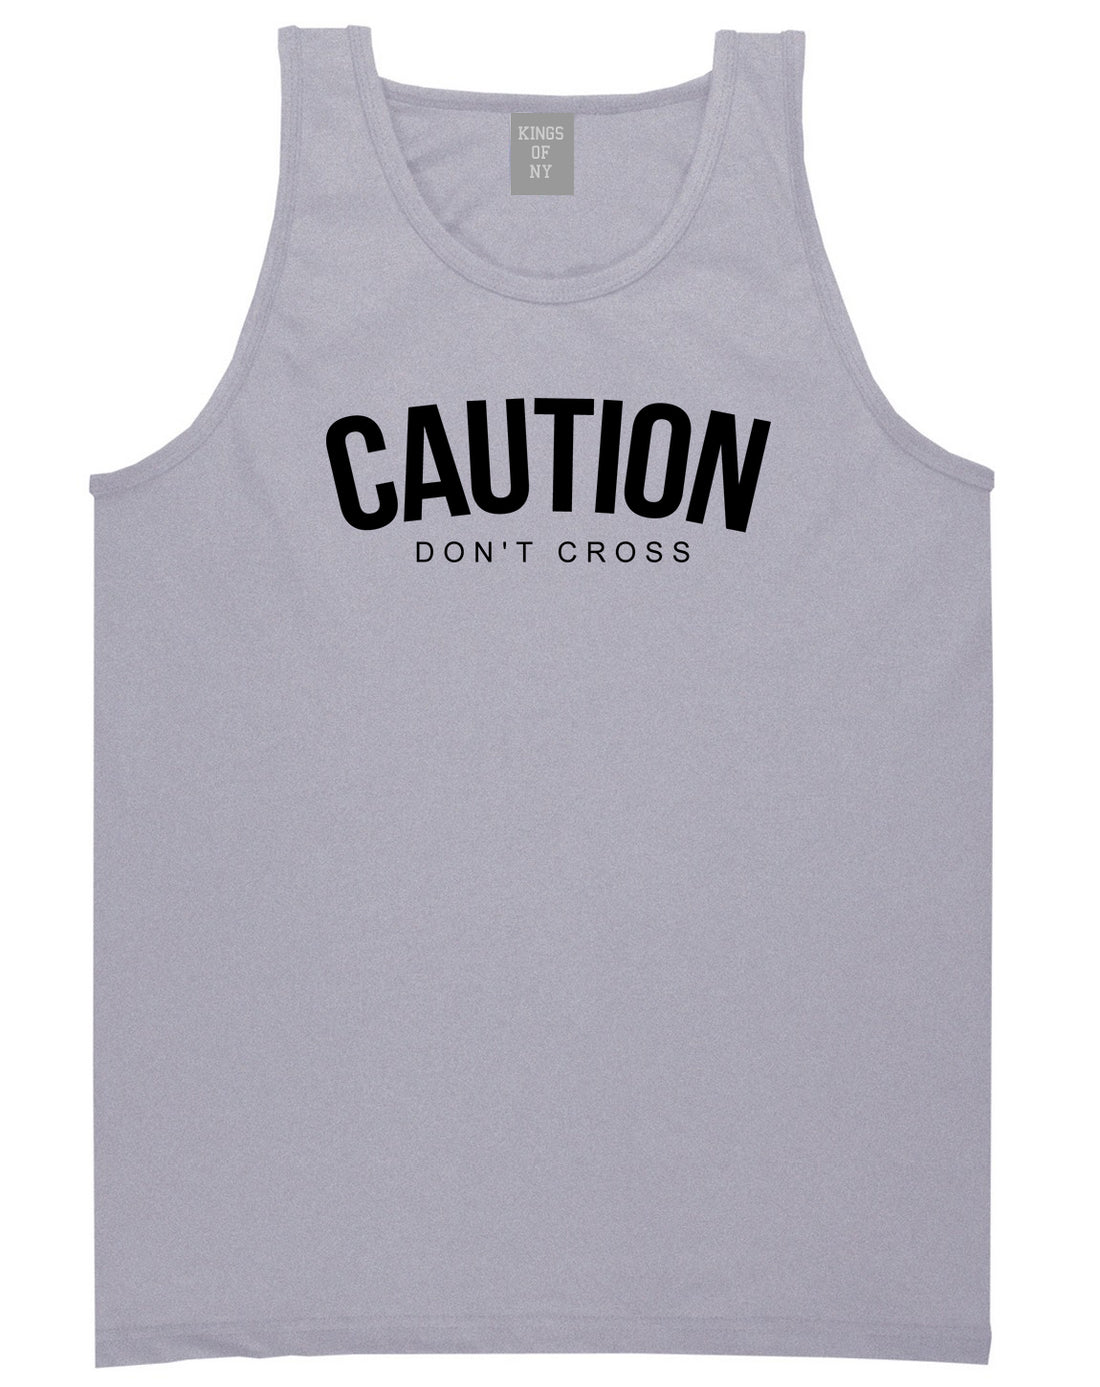 Caution Dont Cross Mens Tank Top Shirt Grey by Kings Of NY